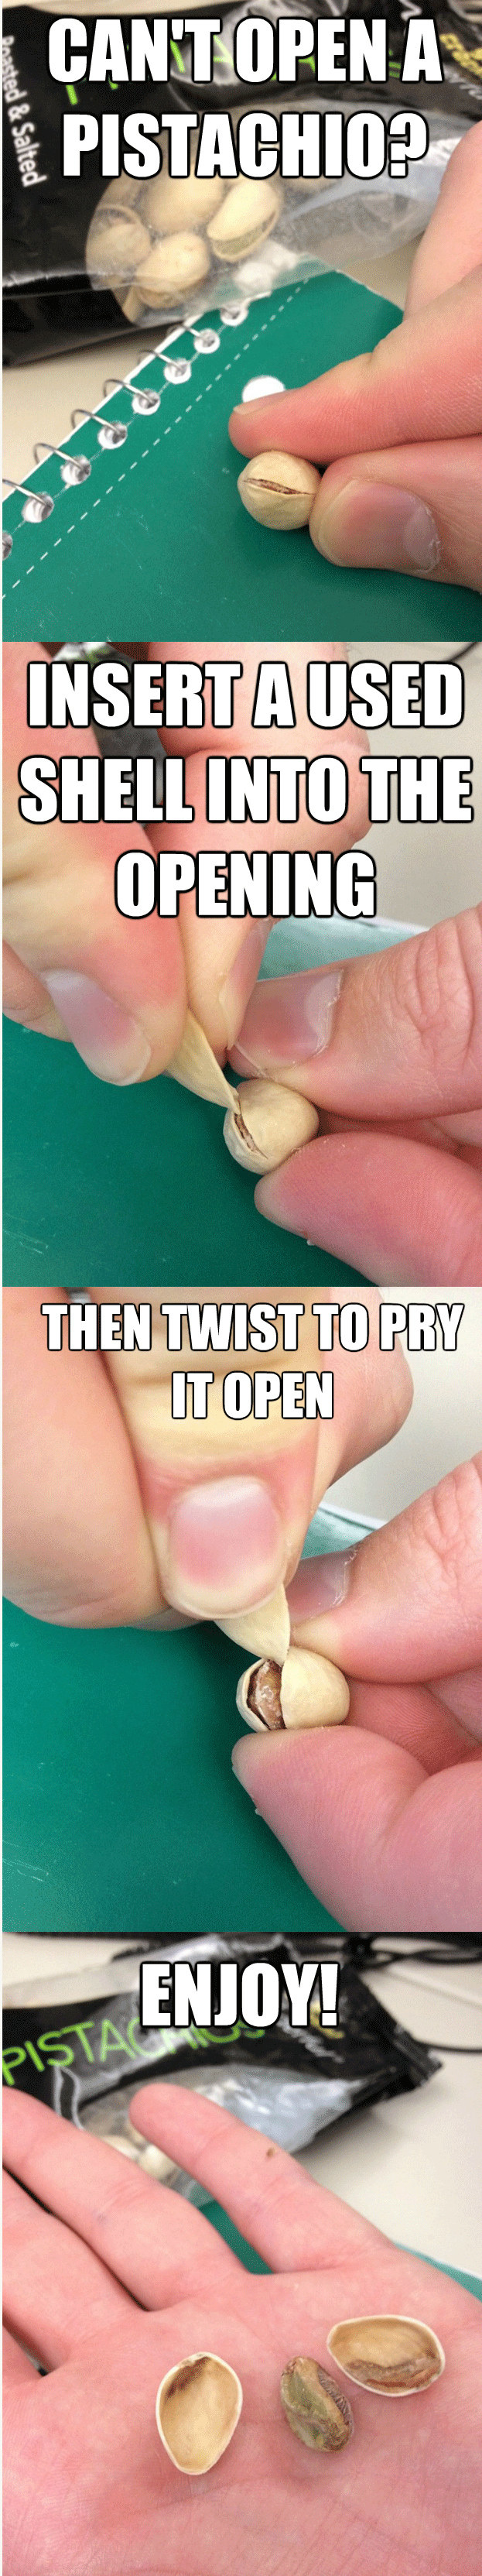 While we're at it — here's how to open a difficult pistachio: